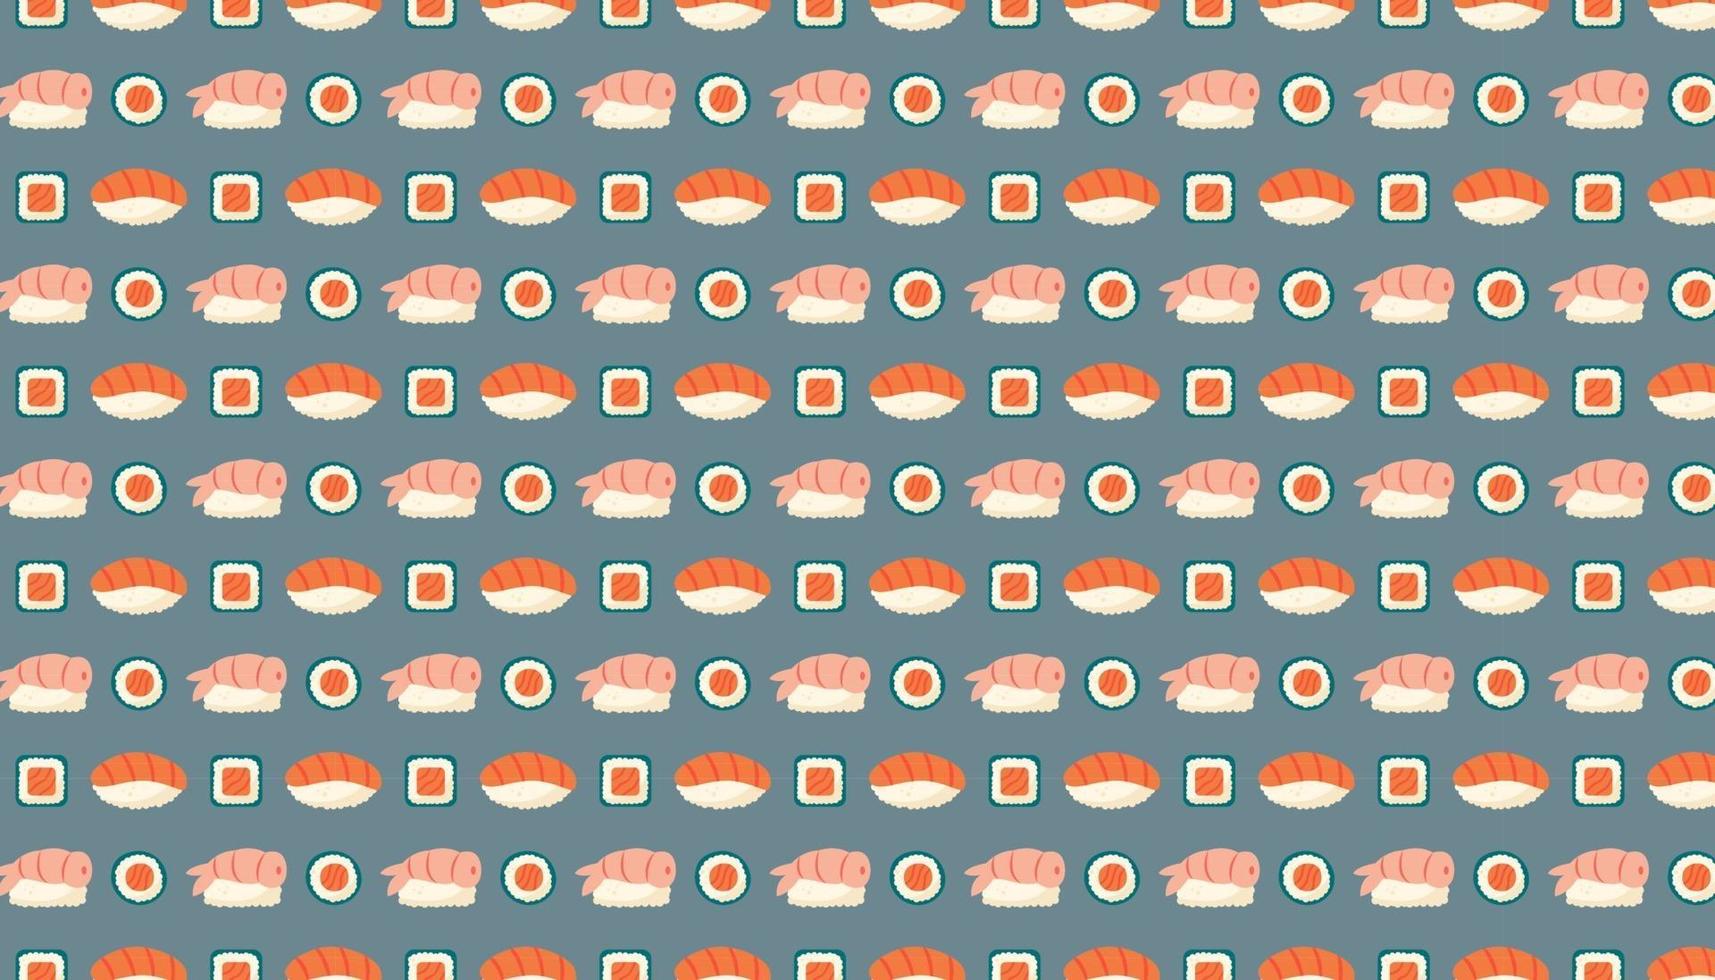 Sushi maki rolls with salmon fish rice asian food delivery pattern vector